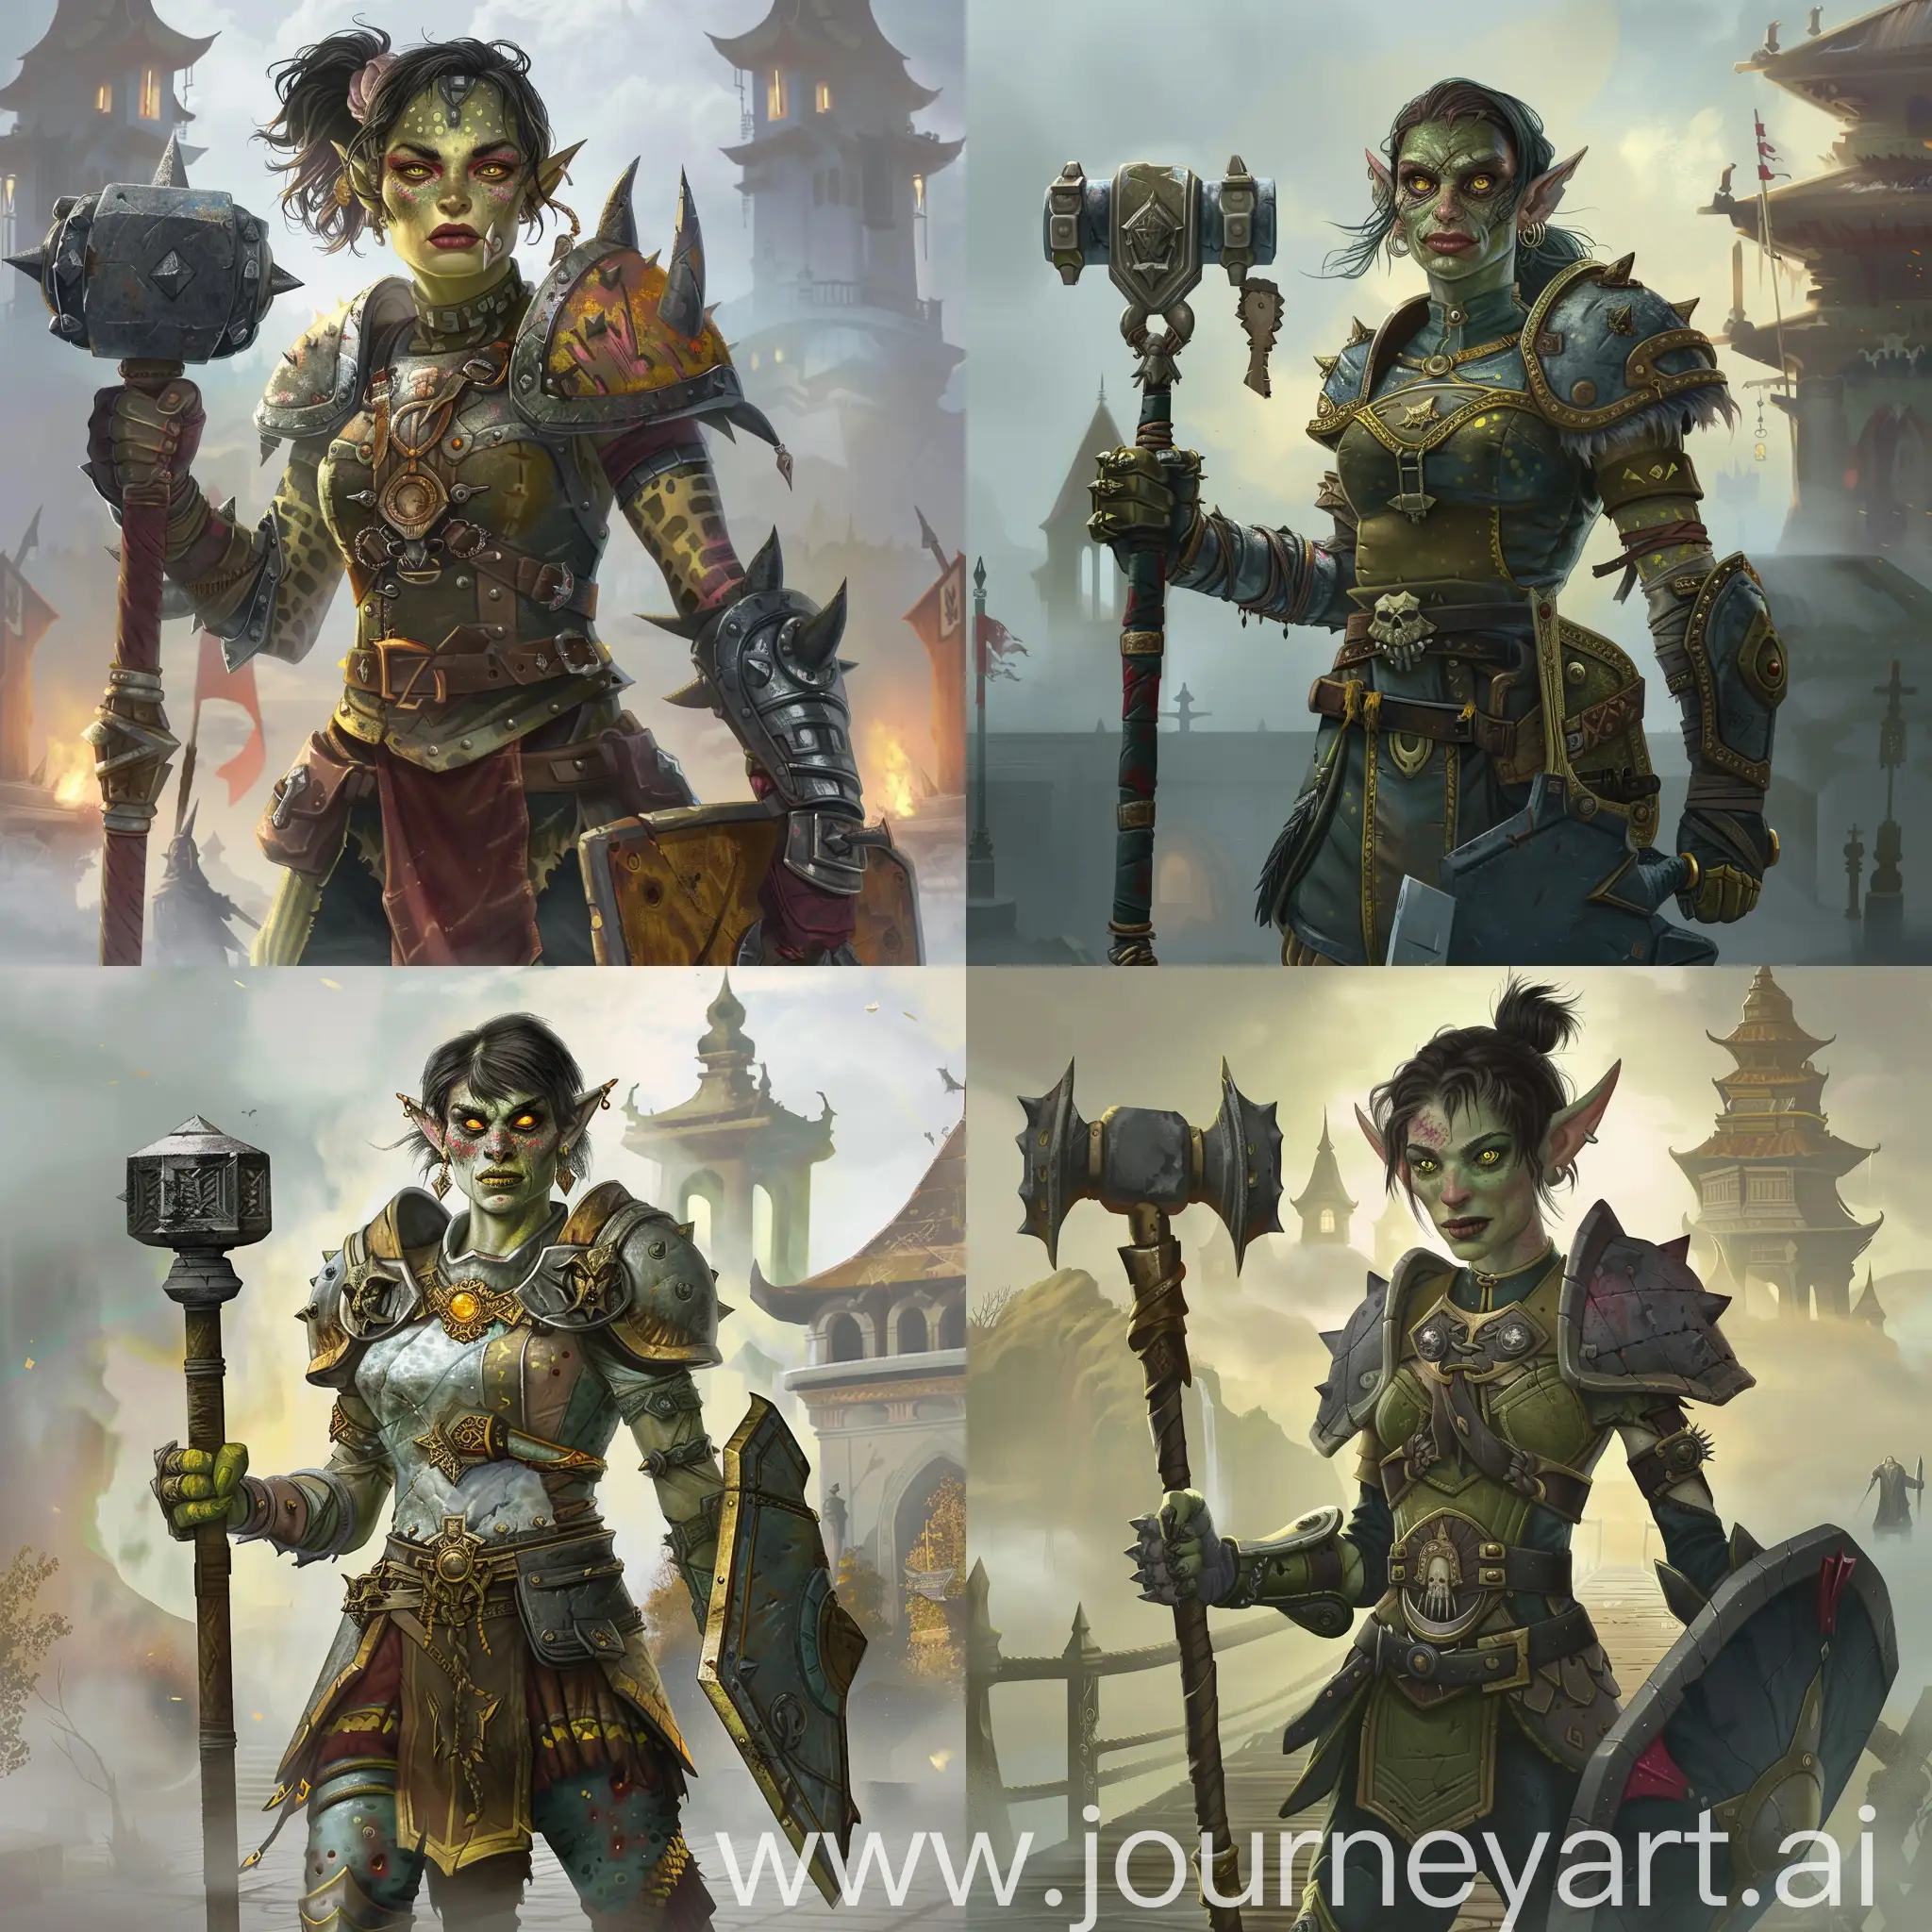 Strong-Female-HalfOrc-Paladin-with-Mace-and-Shield-at-Temple-in-Fog